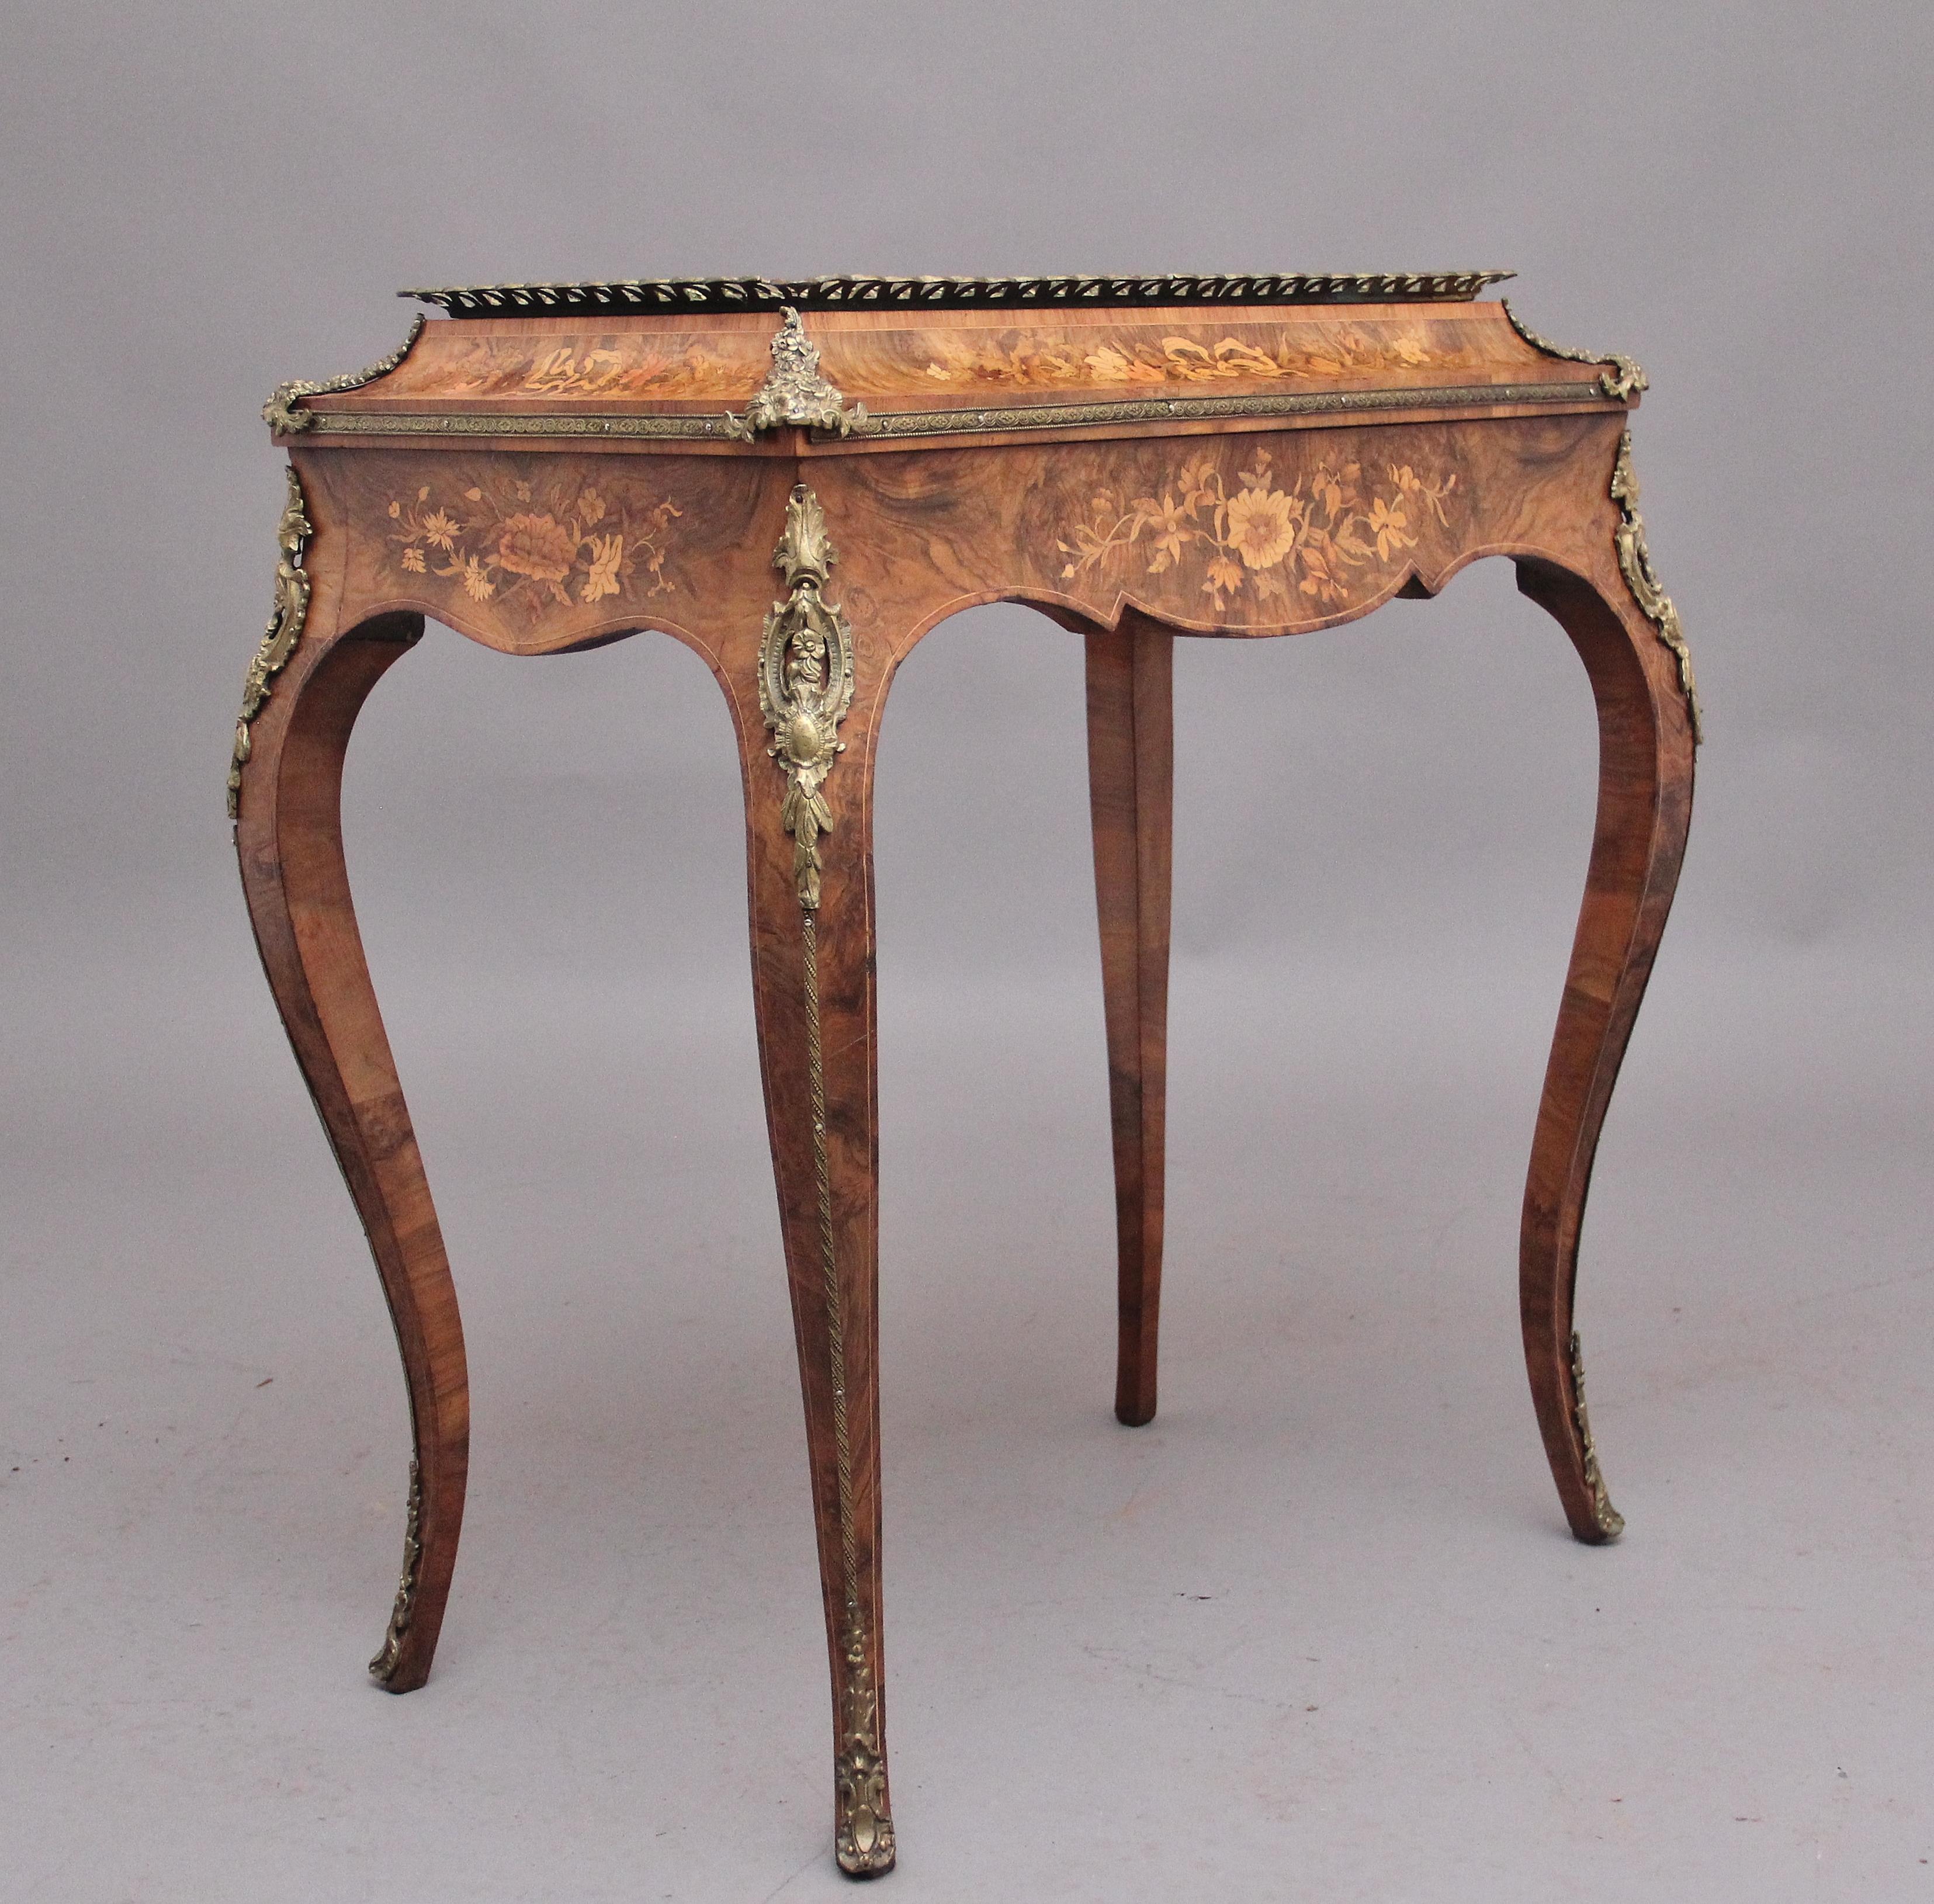 A highly decorative and superb quality 19th Century freestanding burr walnut and marquetry jardiniere/planter/cooler, the rectangular lift up lid to reveal a metal liner inside, the top of the lid is crossbanded and has ormolu mounted handles,